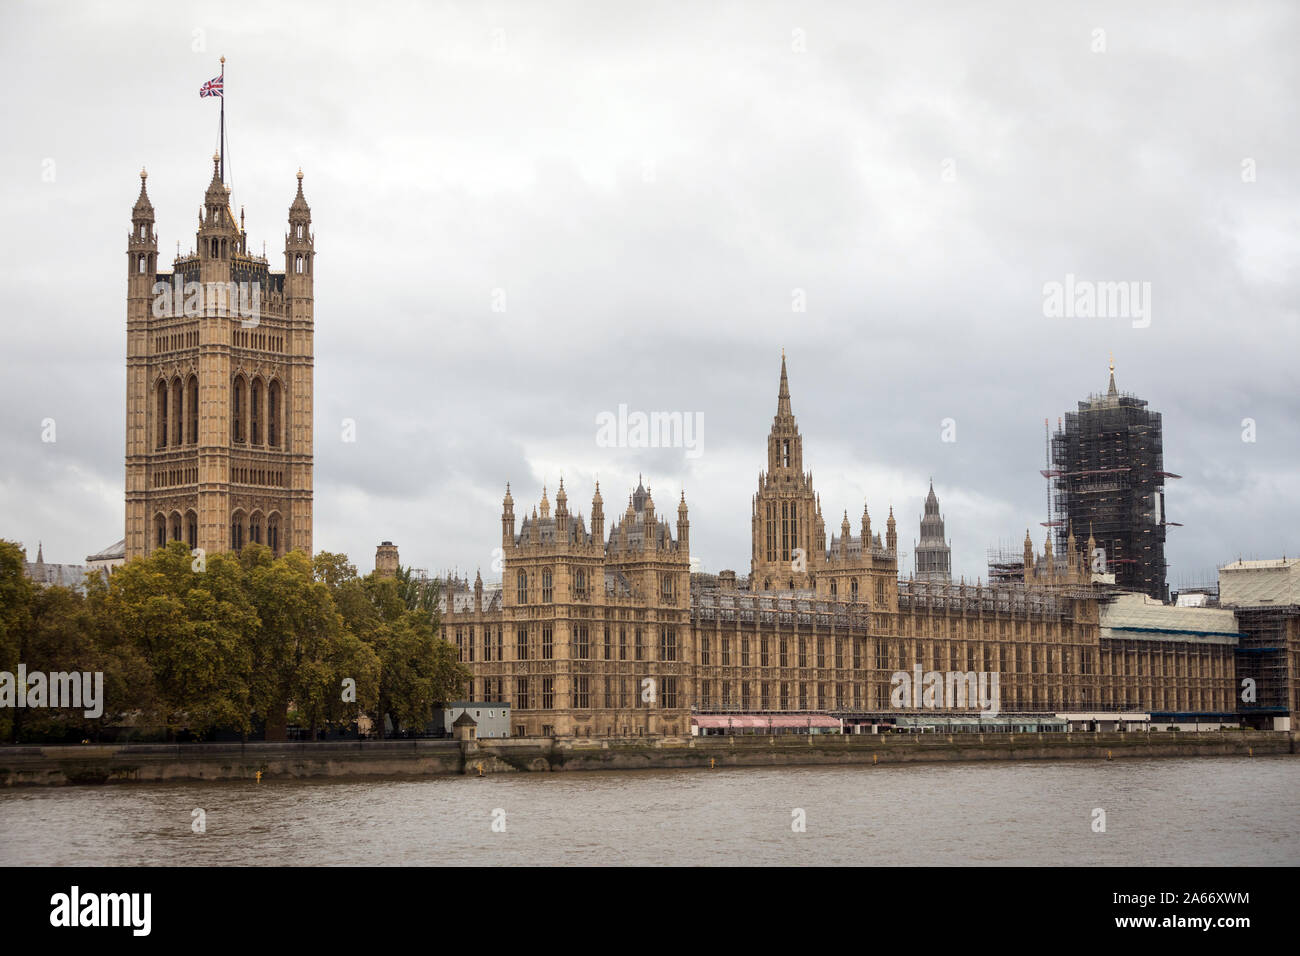 The Palace of Westminster and the River Thames in London Stock Photo